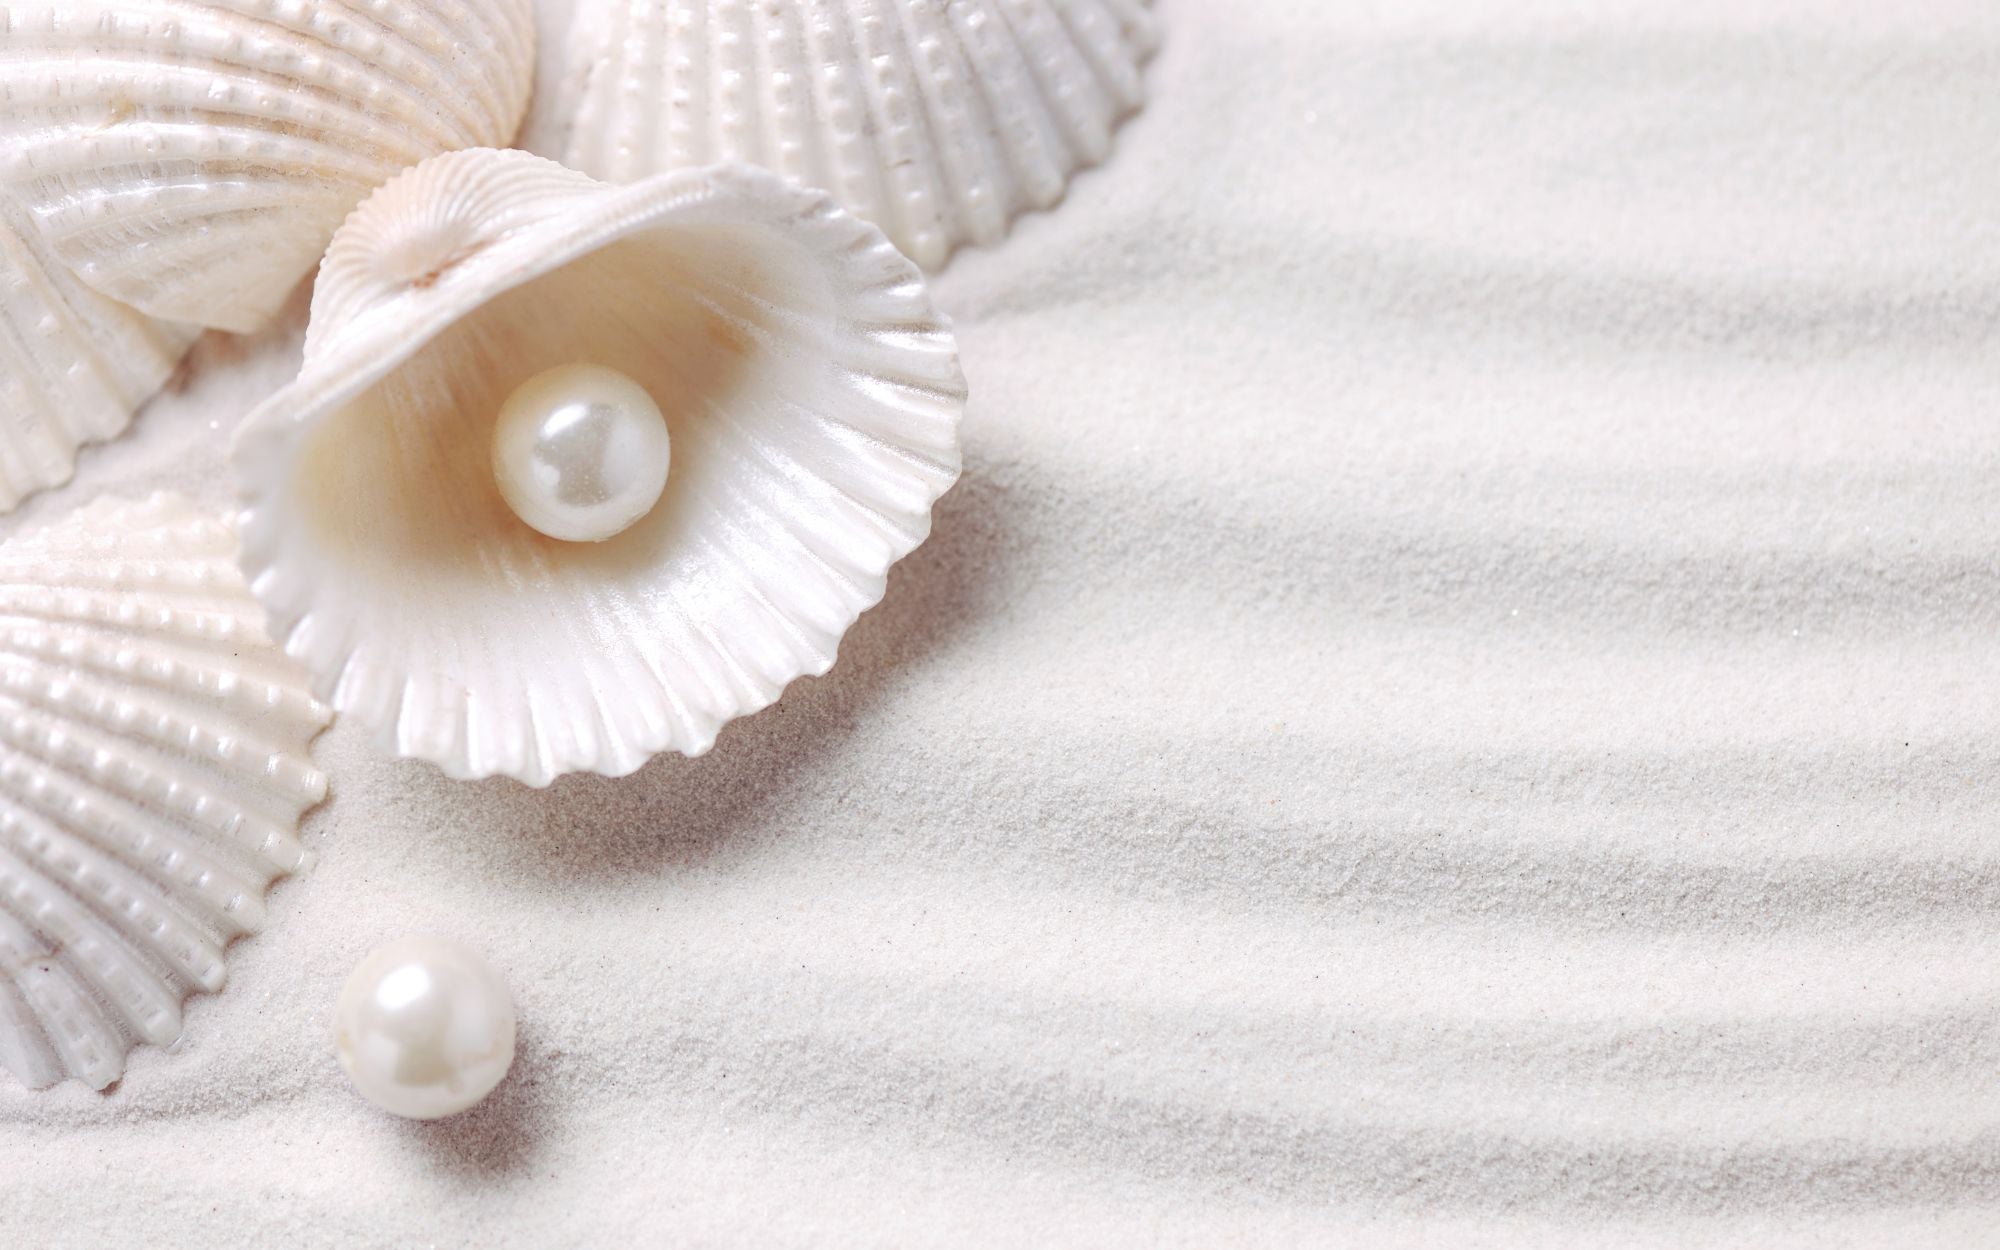 how much are pearls worth - tips for buying pearl